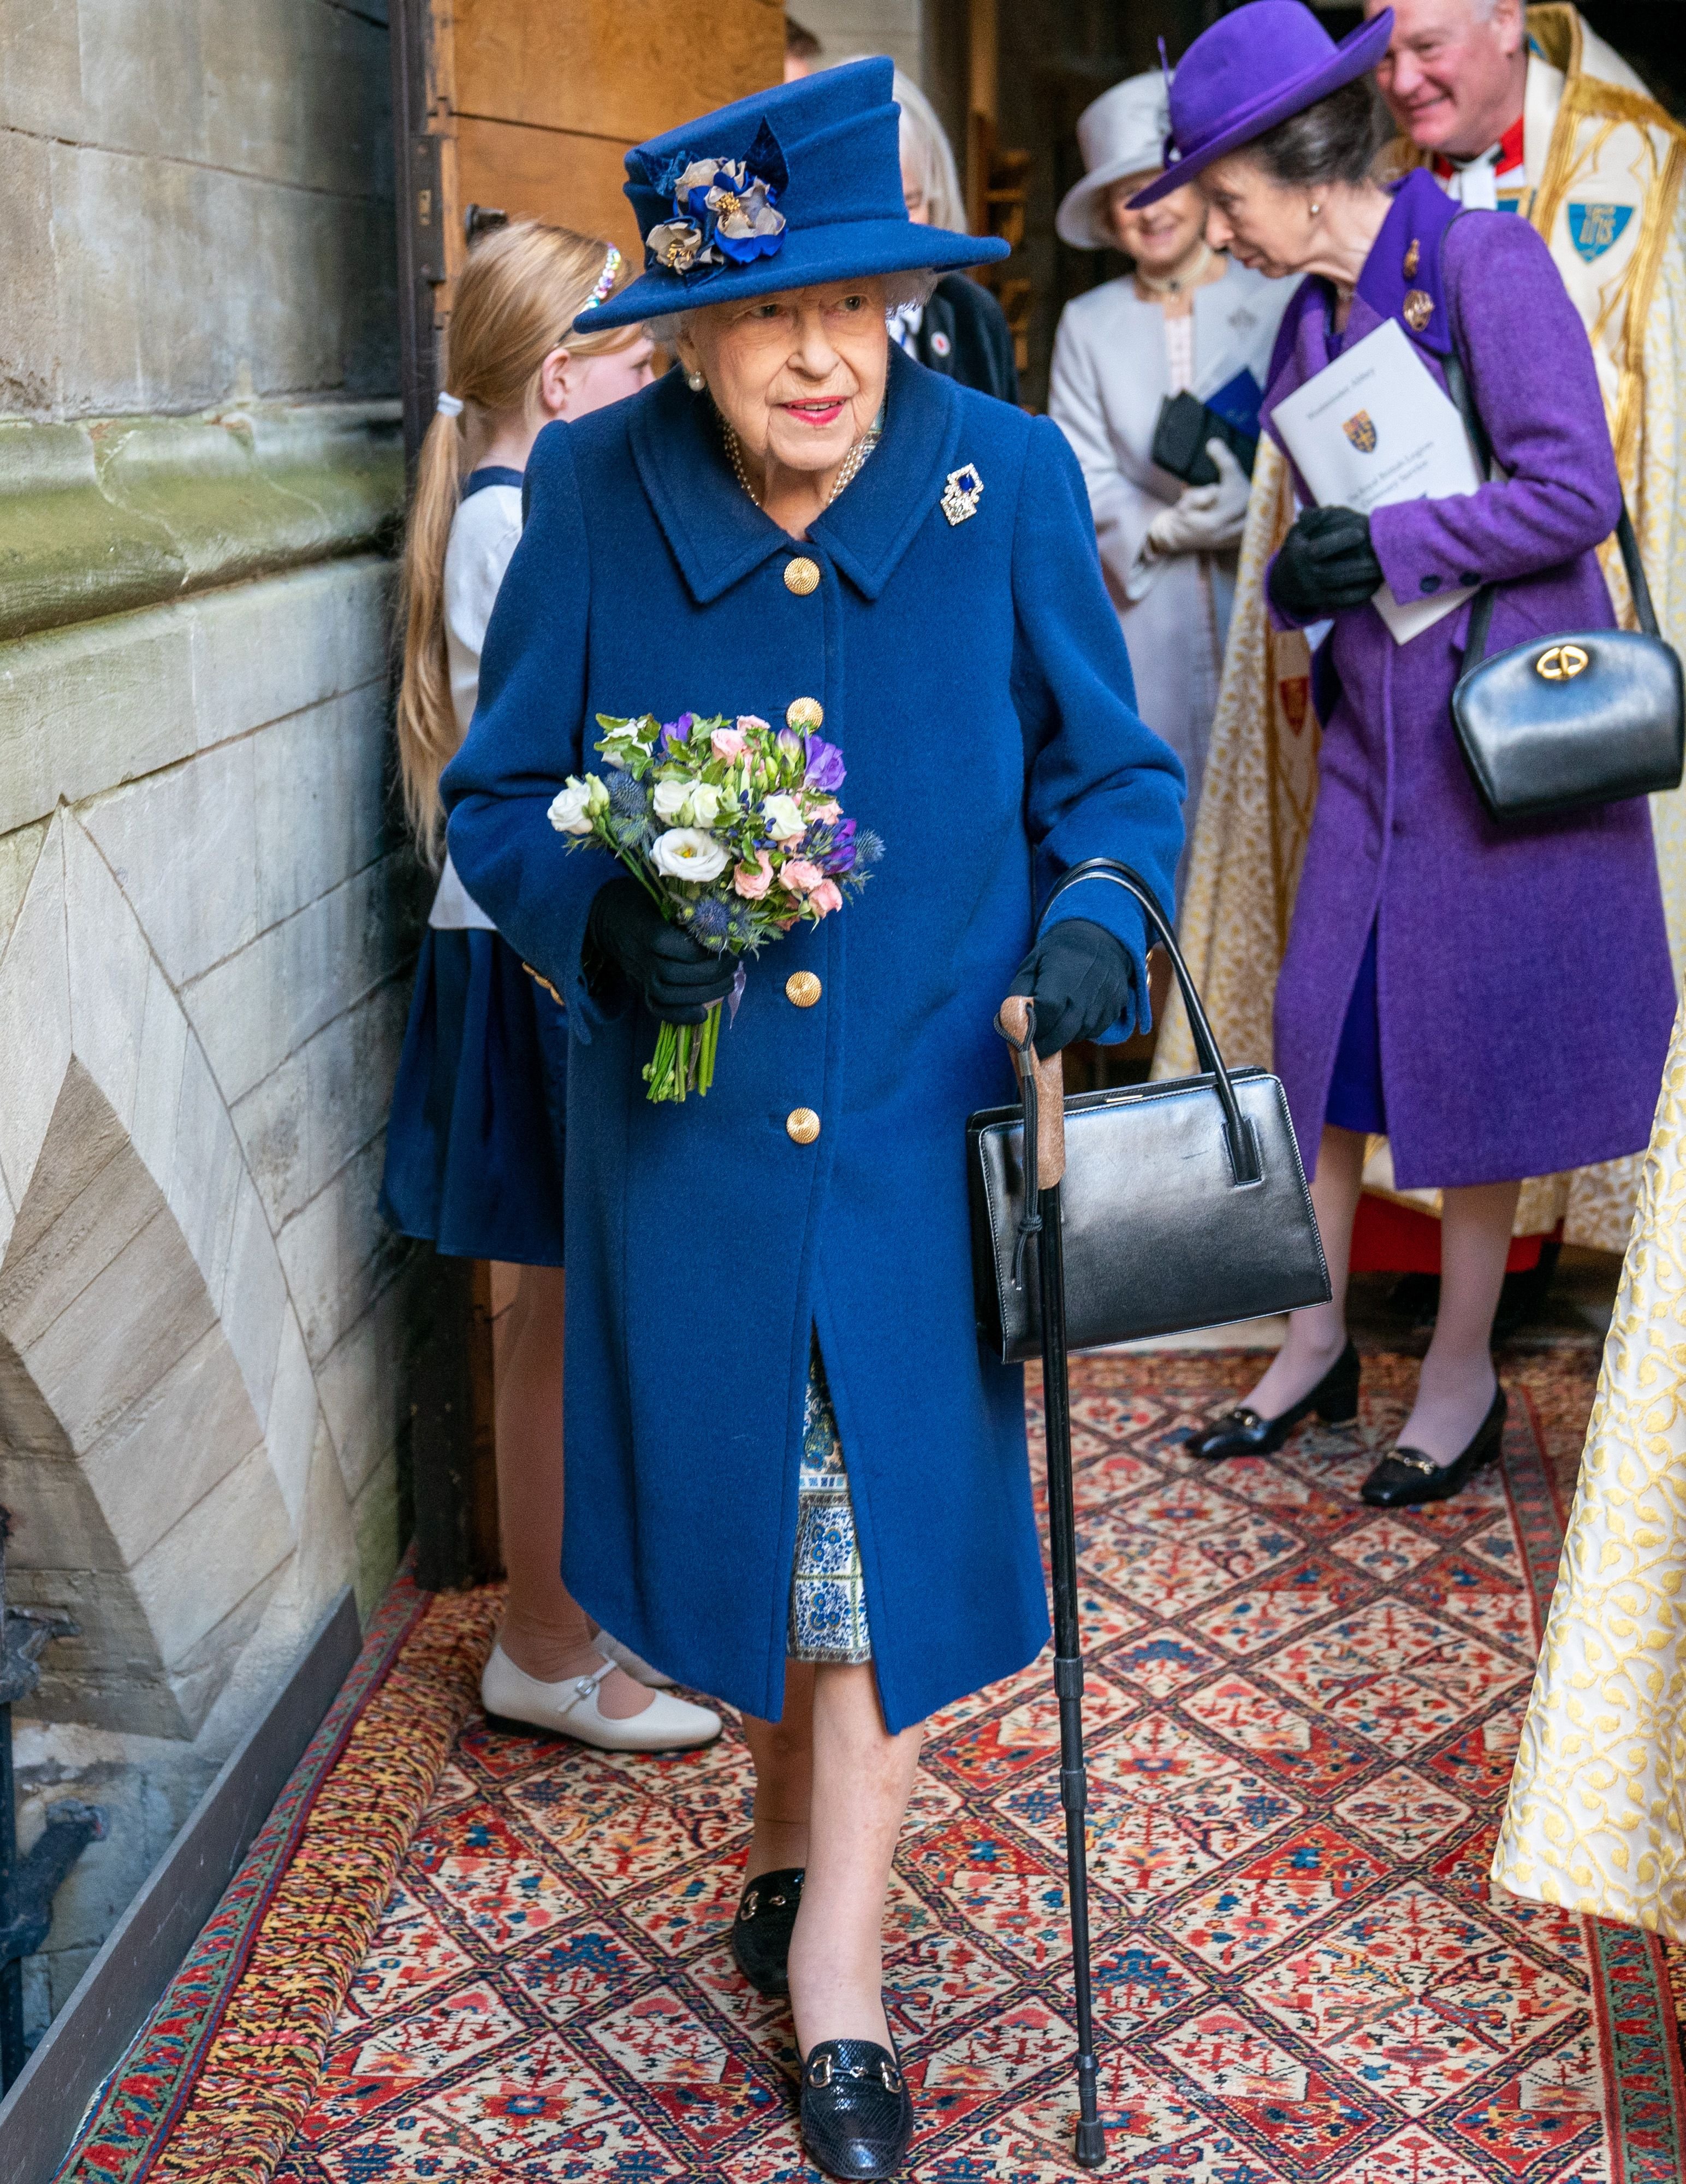 Queen Elizabeth II and Princess Anne at a Service of Thanksgiving to mark the Centenary of the Royal British Legion in London on October 12, 2021. | Source: Getty Images